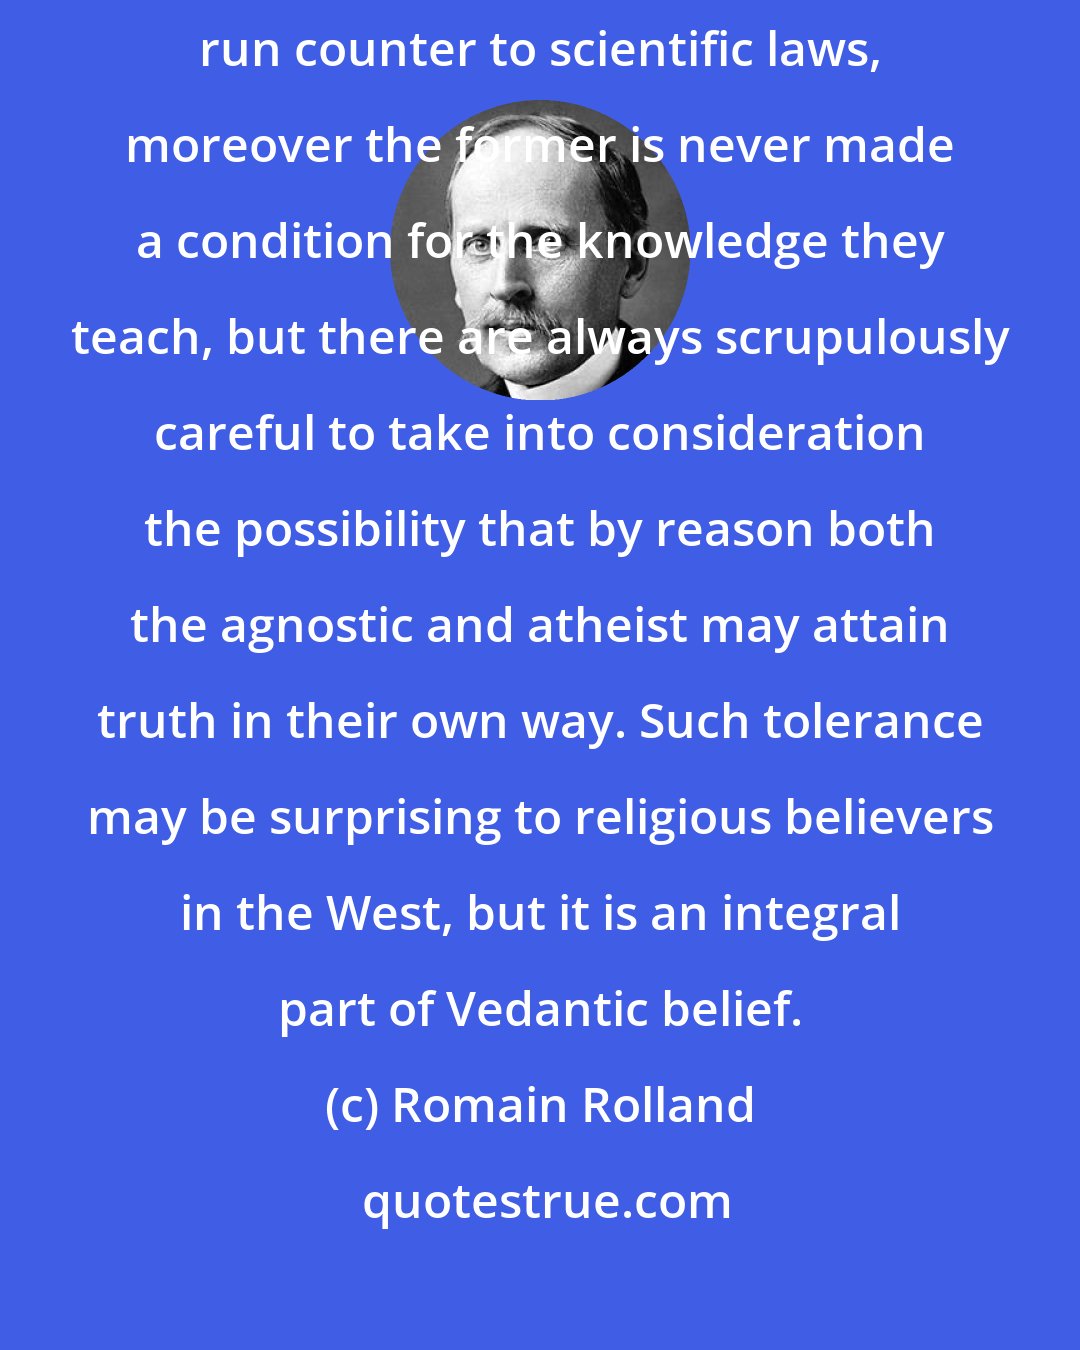 Romain Rolland: Religious faith in the case of the Hindus has never been allowed to run counter to scientific laws, moreover the former is never made a condition for the knowledge they teach, but there are always scrupulously careful to take into consideration the possibility that by reason both the agnostic and atheist may attain truth in their own way. Such tolerance may be surprising to religious believers in the West, but it is an integral part of Vedantic belief.